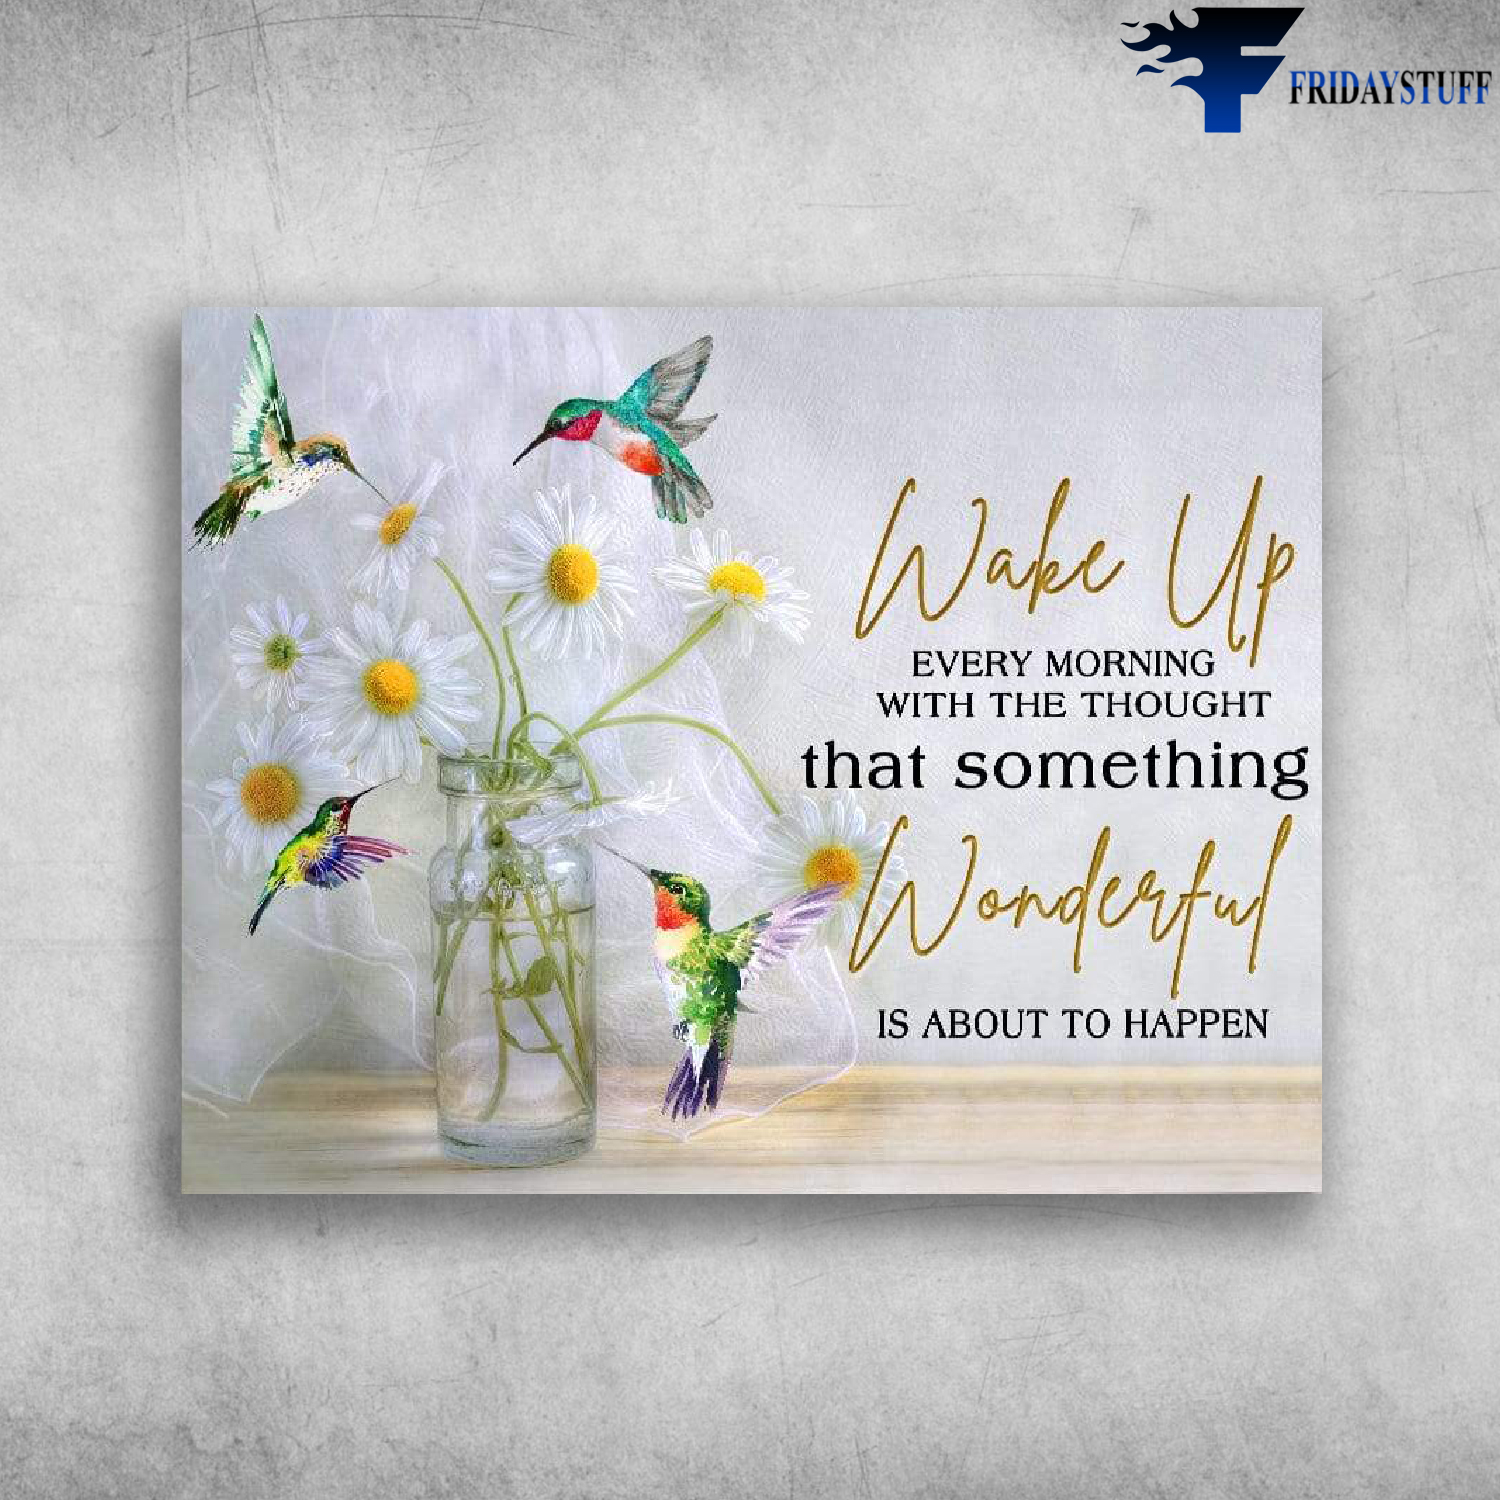 Wake Up Every Morning With The Thought That Something Wonderful Is About To Happen